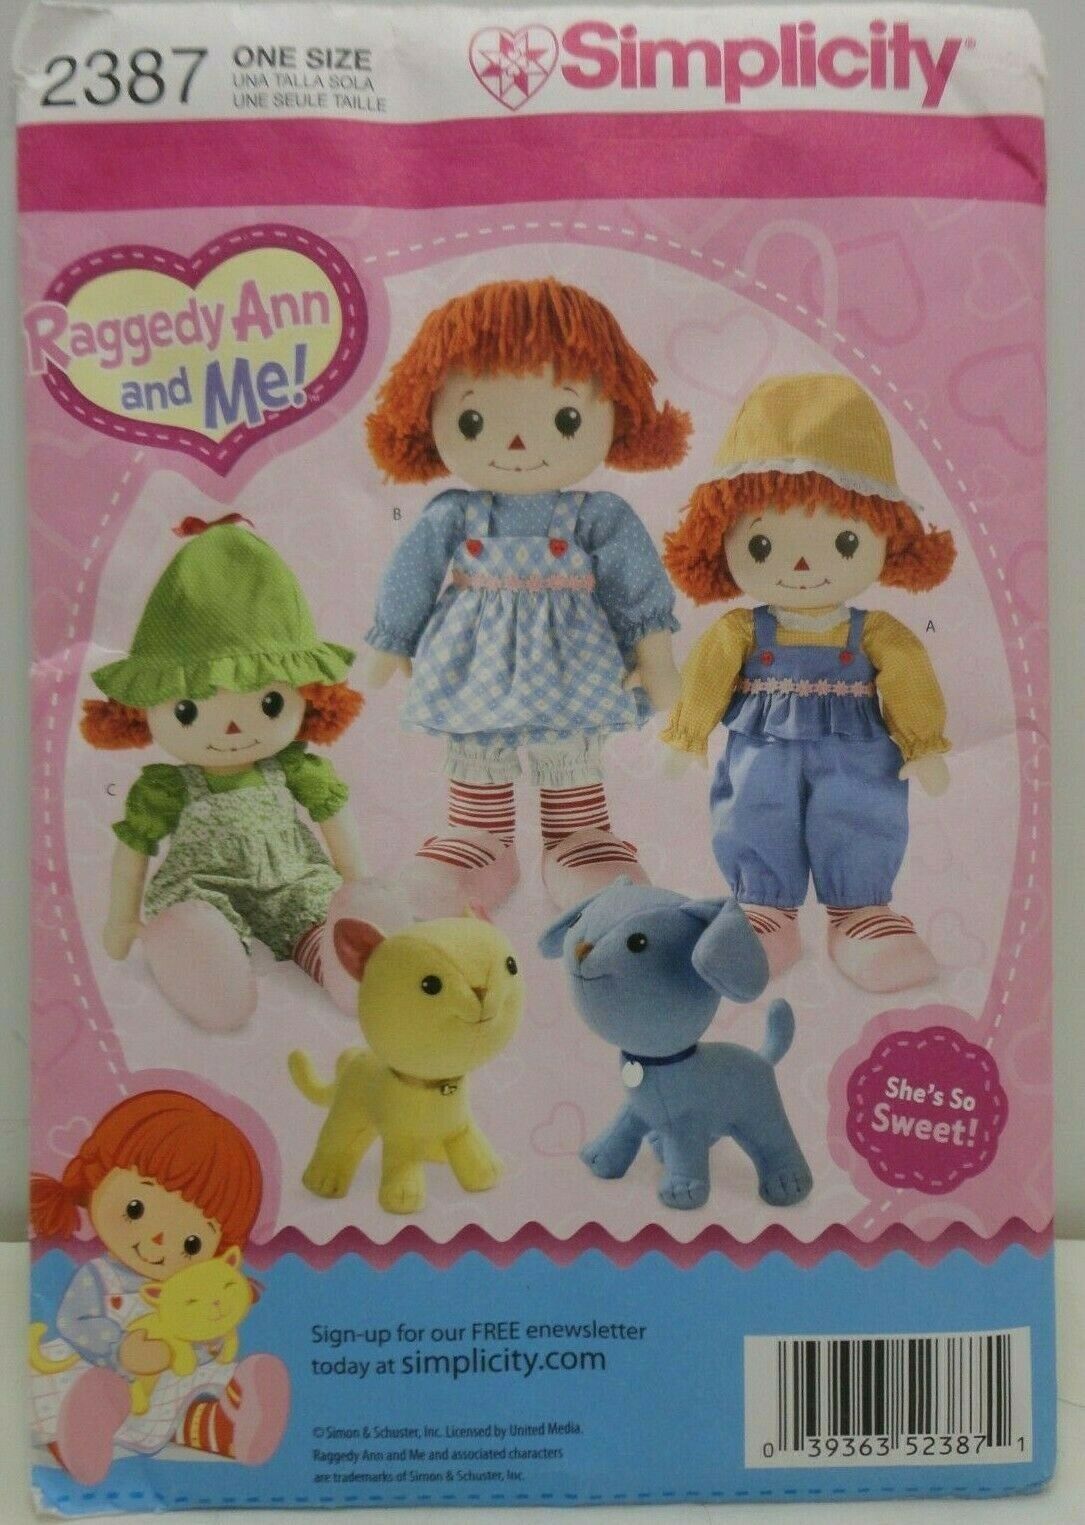 Simplicity Craft Pattern 2387 Raggedy Ann And Me